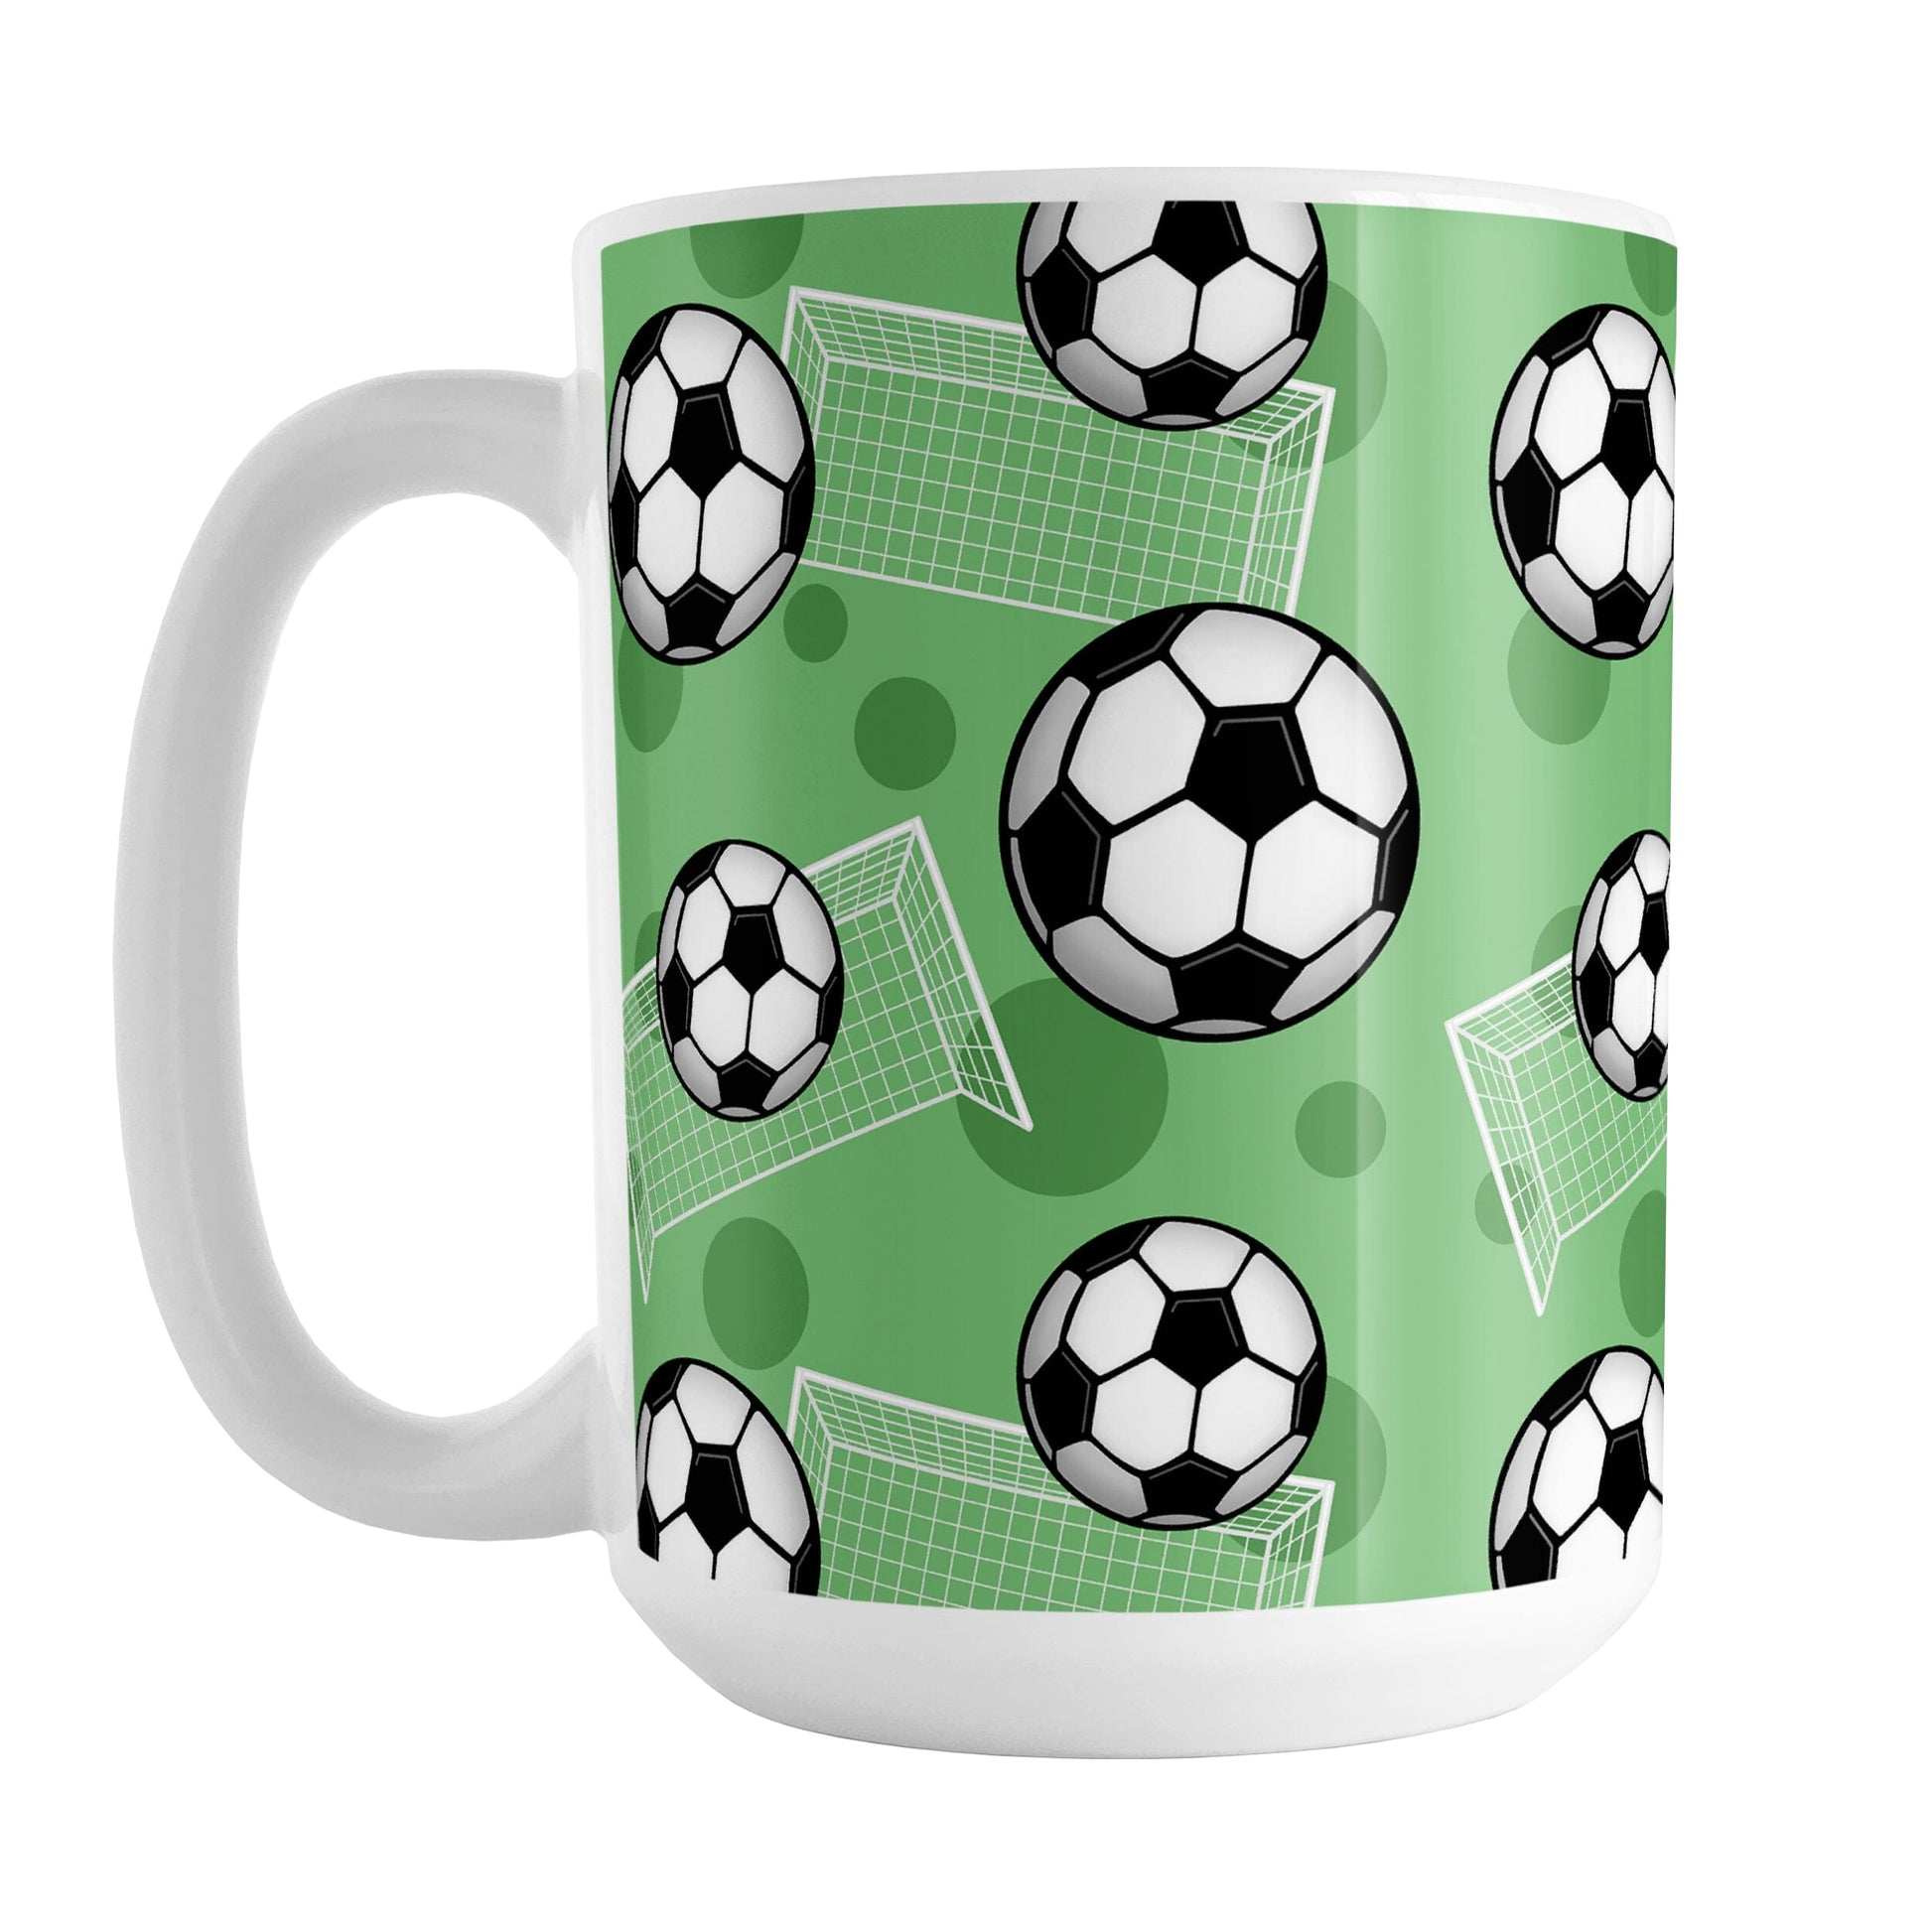 Soccer Ball and Goal Pattern Green Mug (15oz) at Amy's Coffee Mugs. A ceramic coffee mug designed with a pattern of soccer balls and soccer goals over a green background color with green circles. 